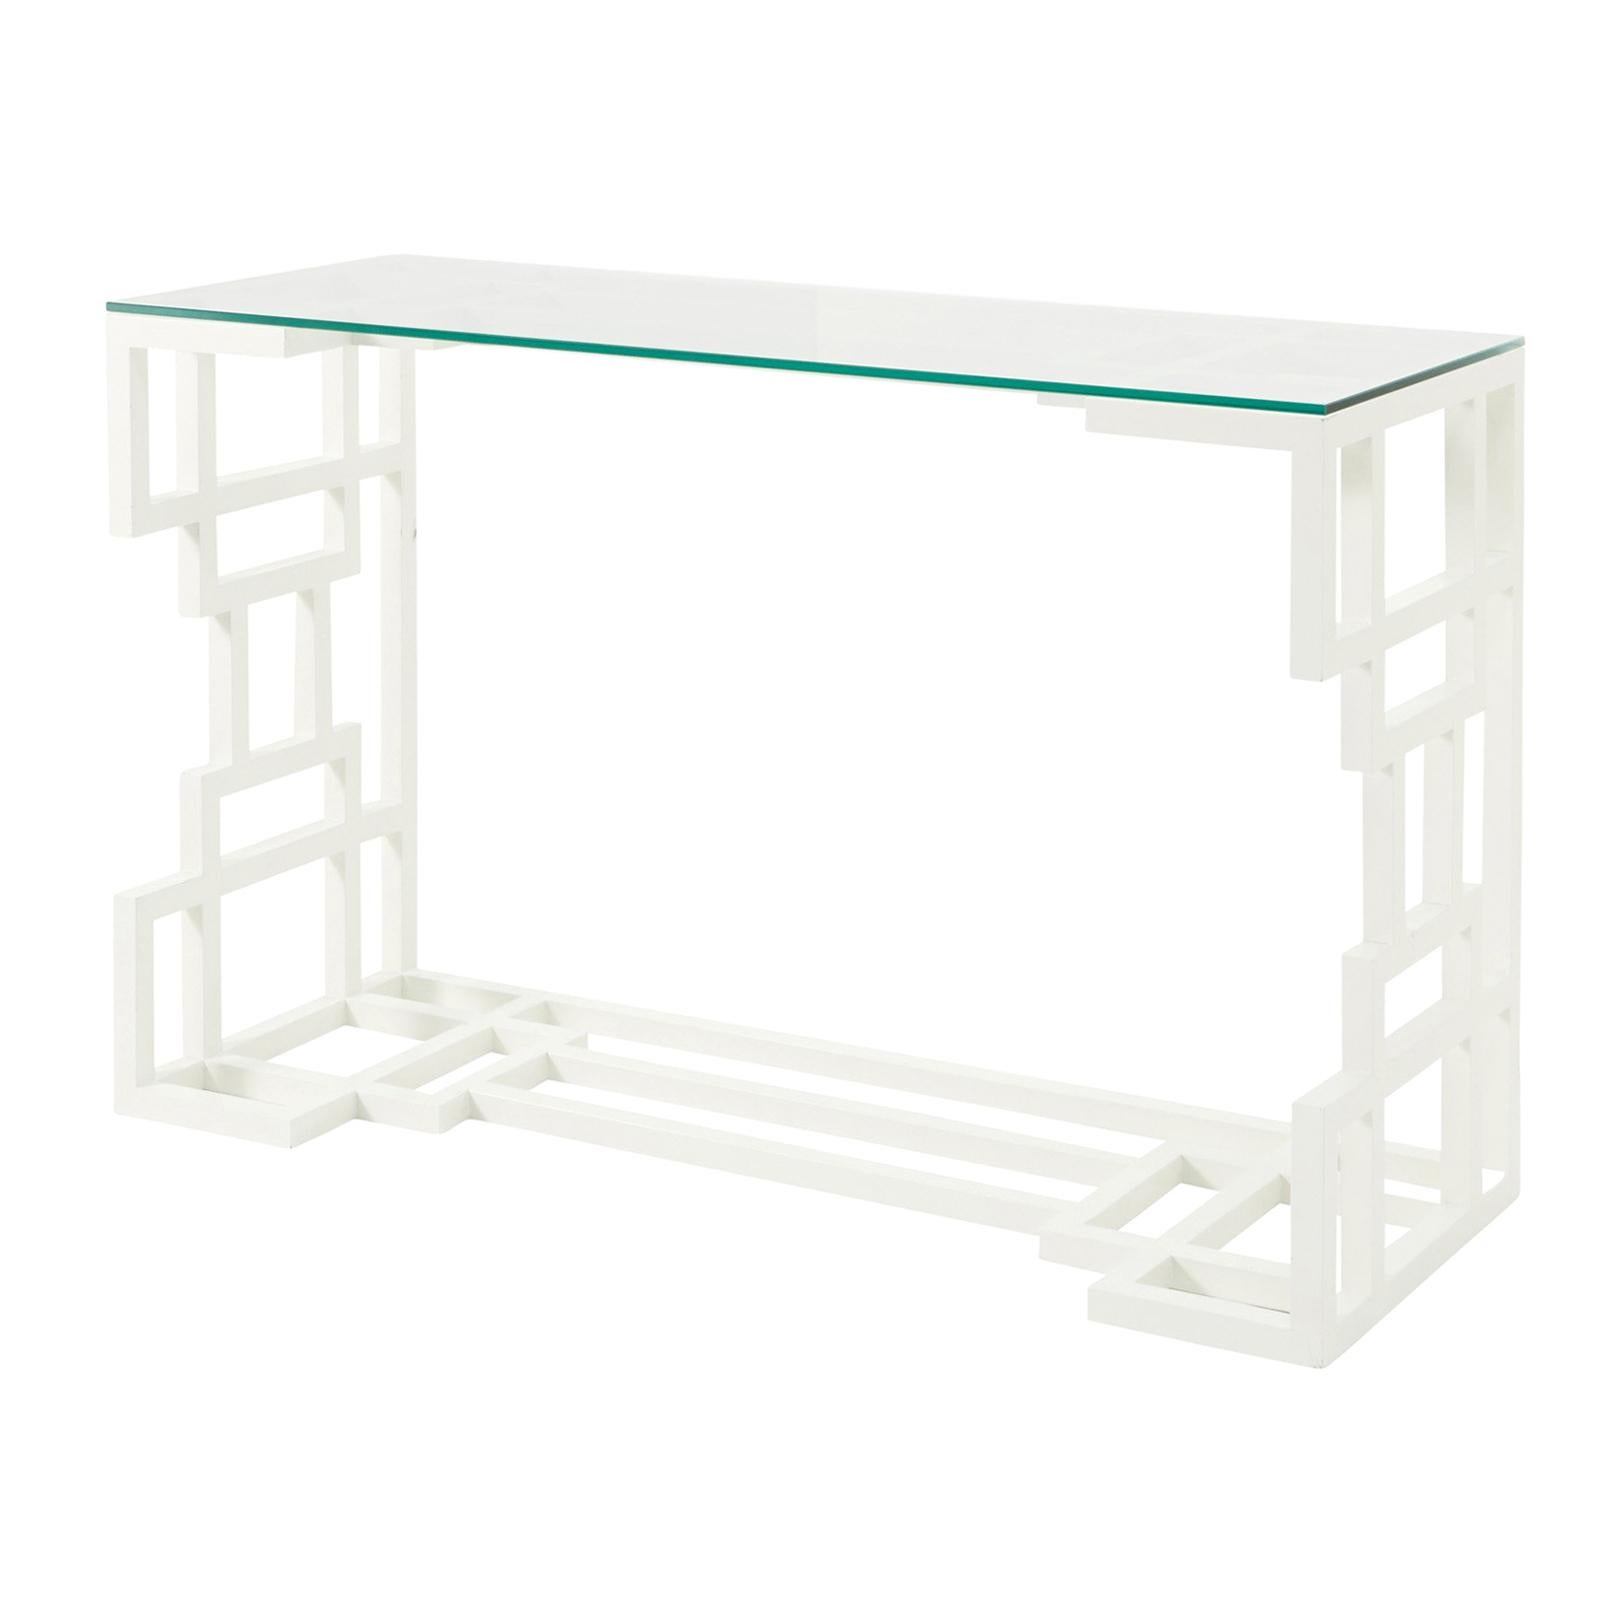 1980s Painted French Metal Console Table in White with Glass Top